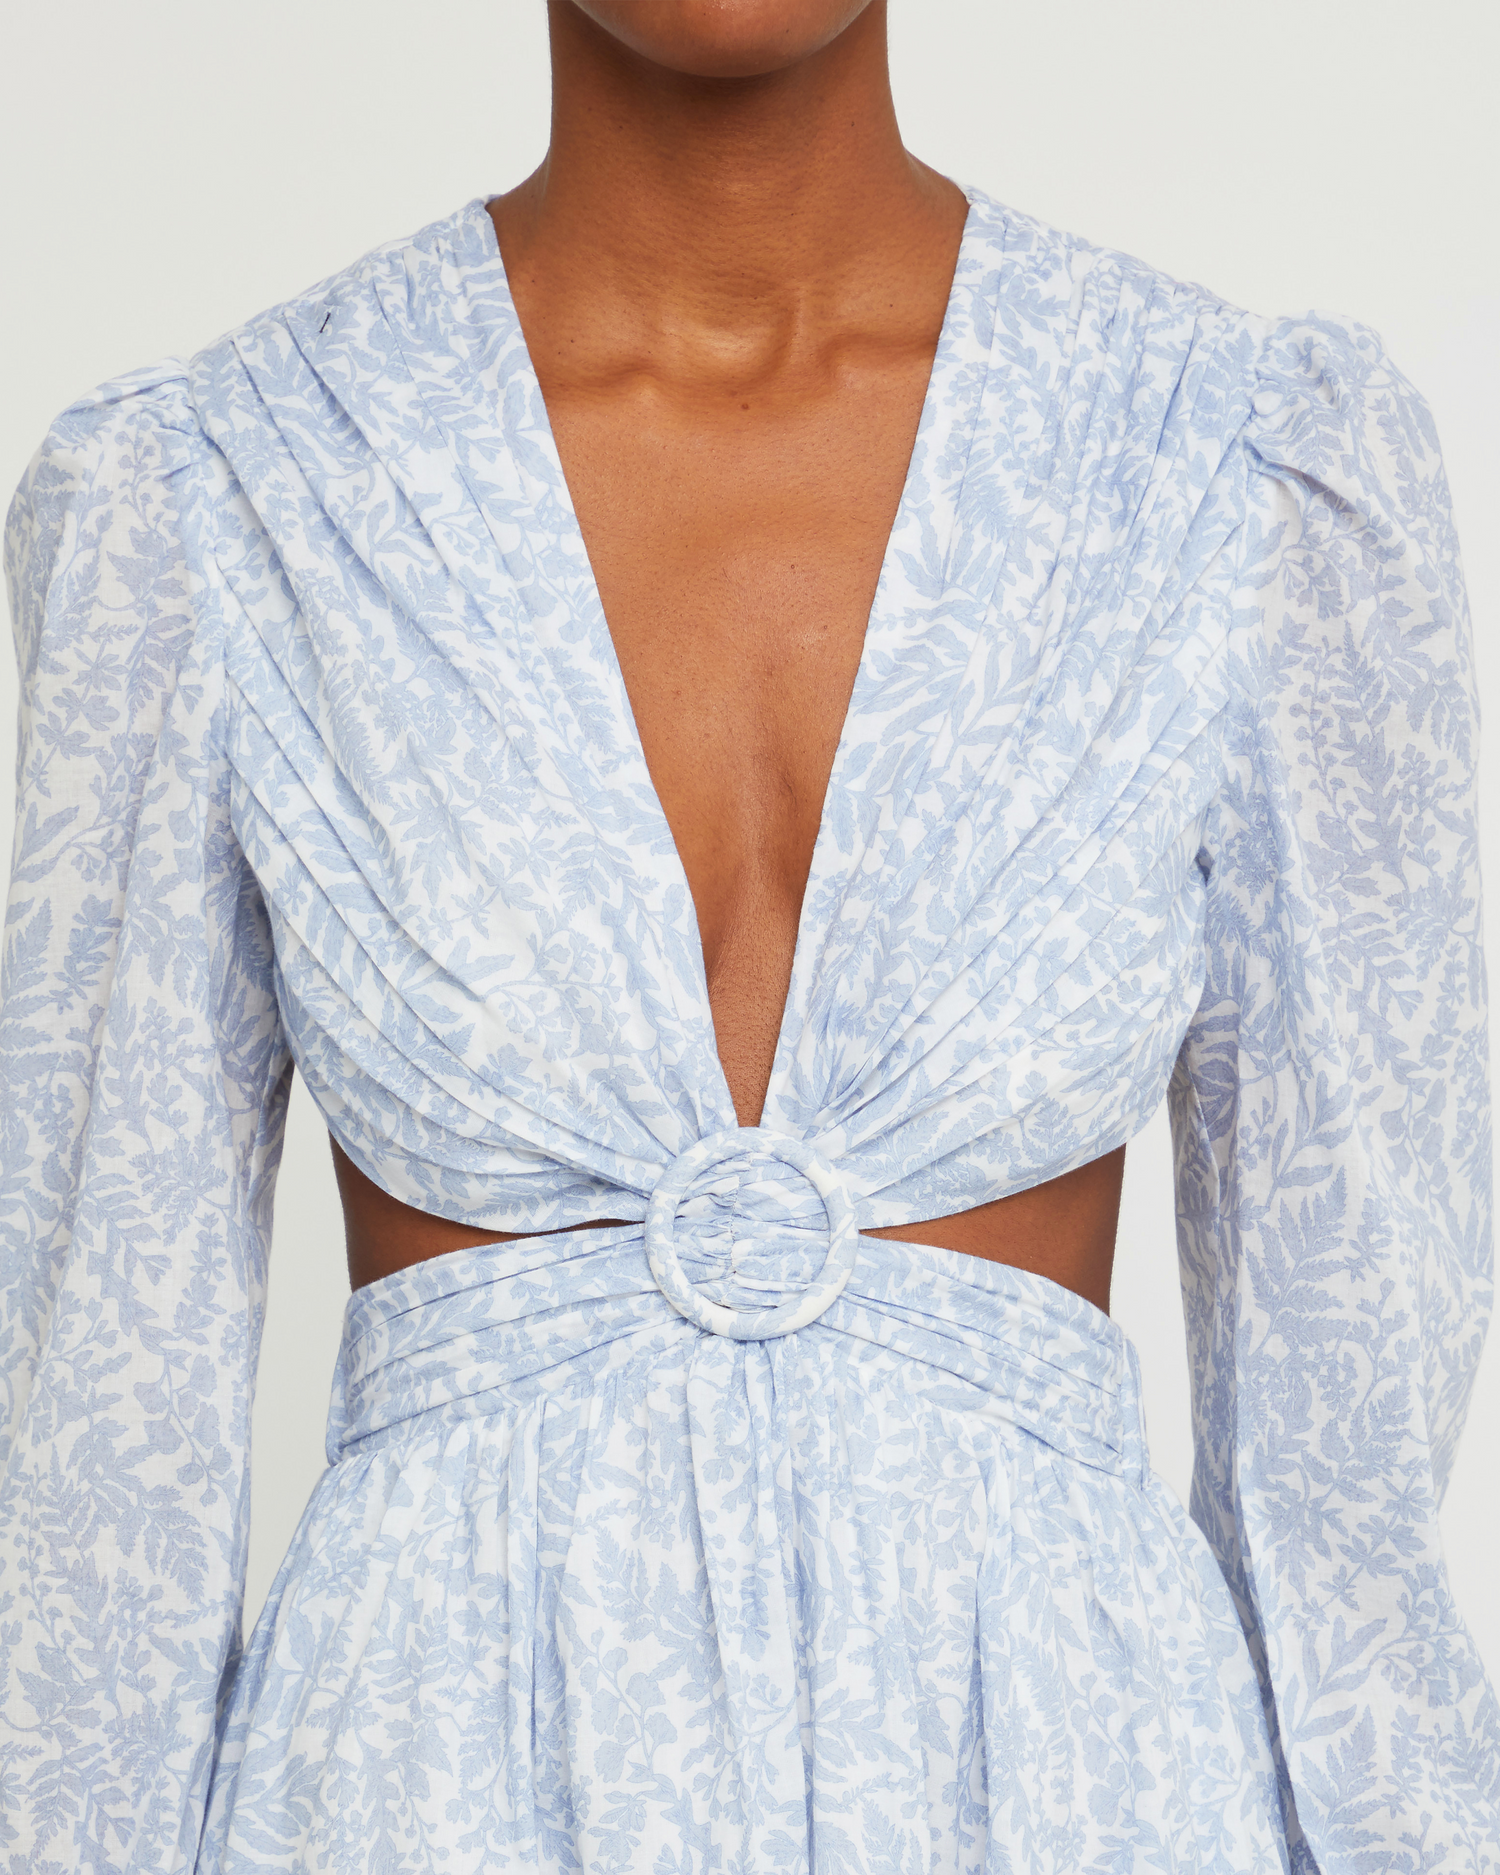 Sixth image of Kimia Cotton Dress, a blue maxi dress, open back, cut outs, V-neck, plunge, floral, long sleeves, puff sleeve